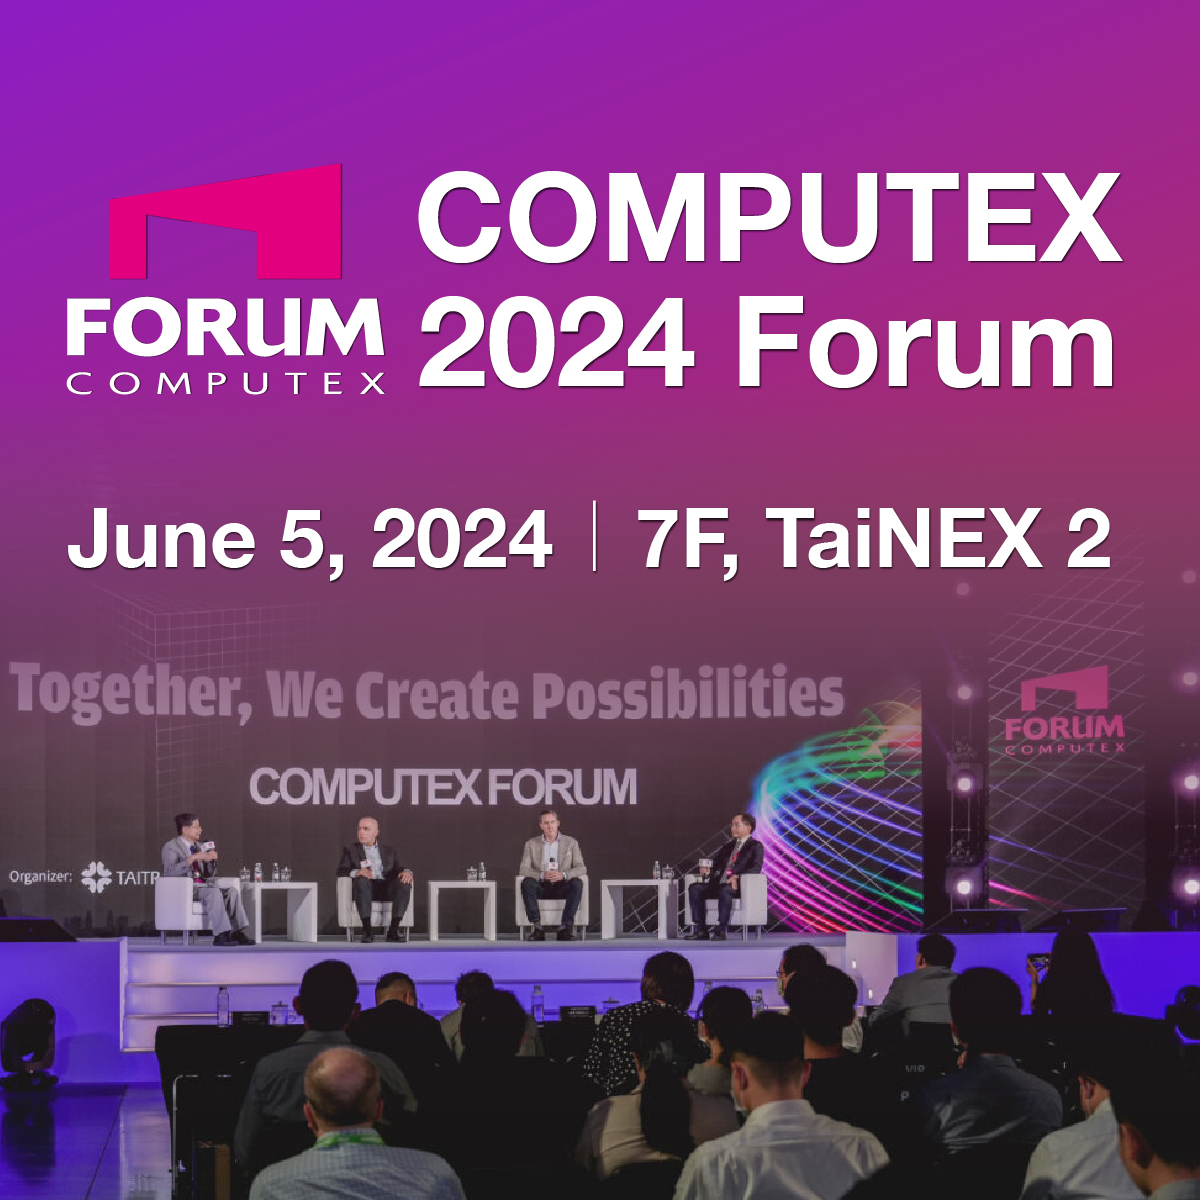 🚀 Dive into the Latest AI Trends! Join us at the 2024 COMPUTEX Forum as we explore 'Generative AI.' 🤖
Discover its industry applications, innovations, and hardware support.
🌟 Don't miss out on this opportunity to seize the future of AI!
Hear from industry leaders speakers…